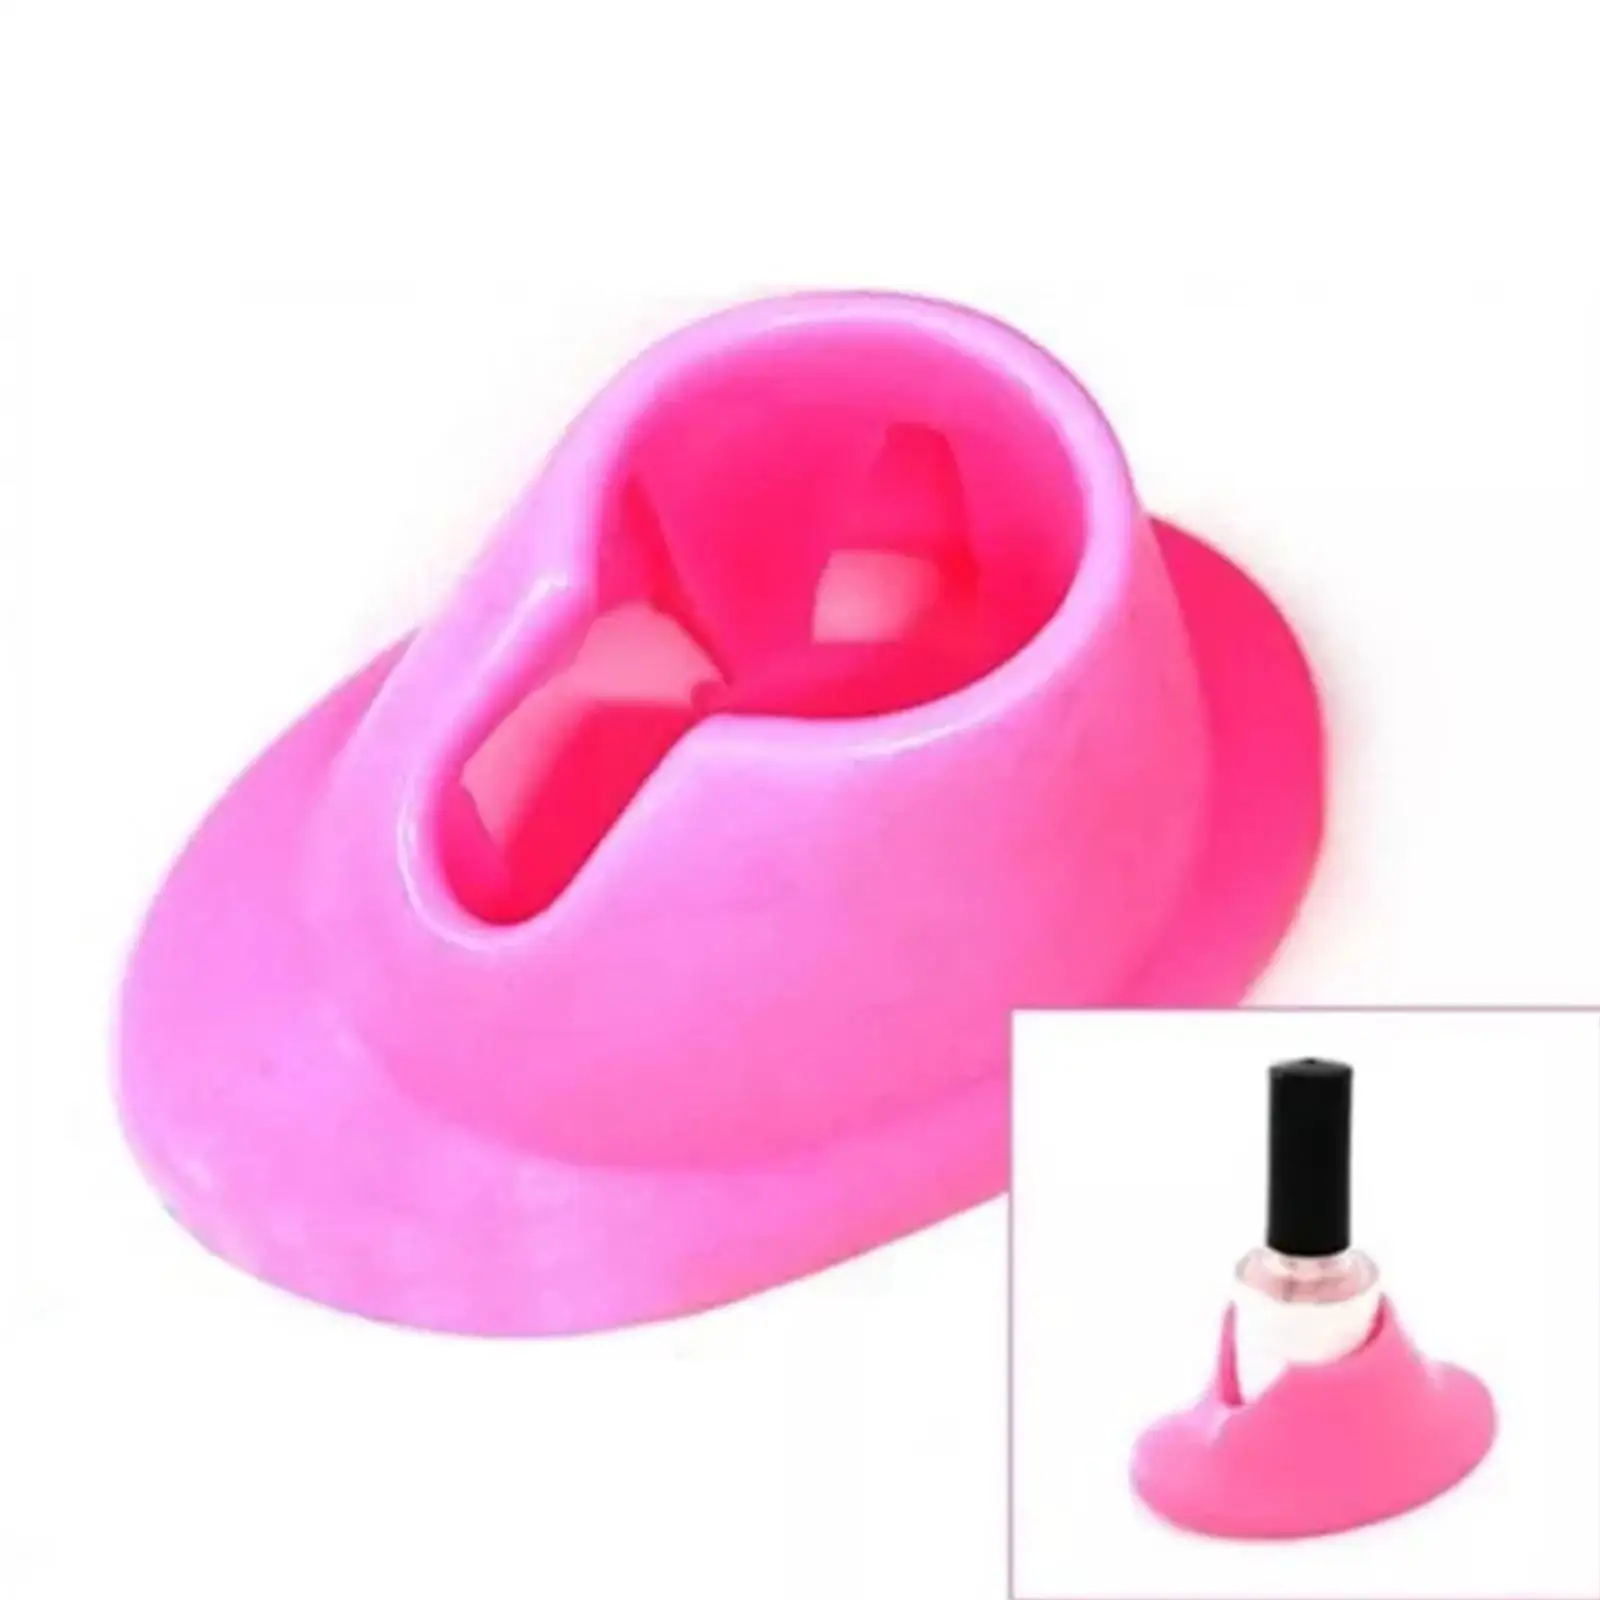 

Nail Polish Bottle Holder Spill Proof Rubber Nail Tips Stand Glue Varnish Stand Nail Holder Bottle Seat Tray Feature Displa I2Q9